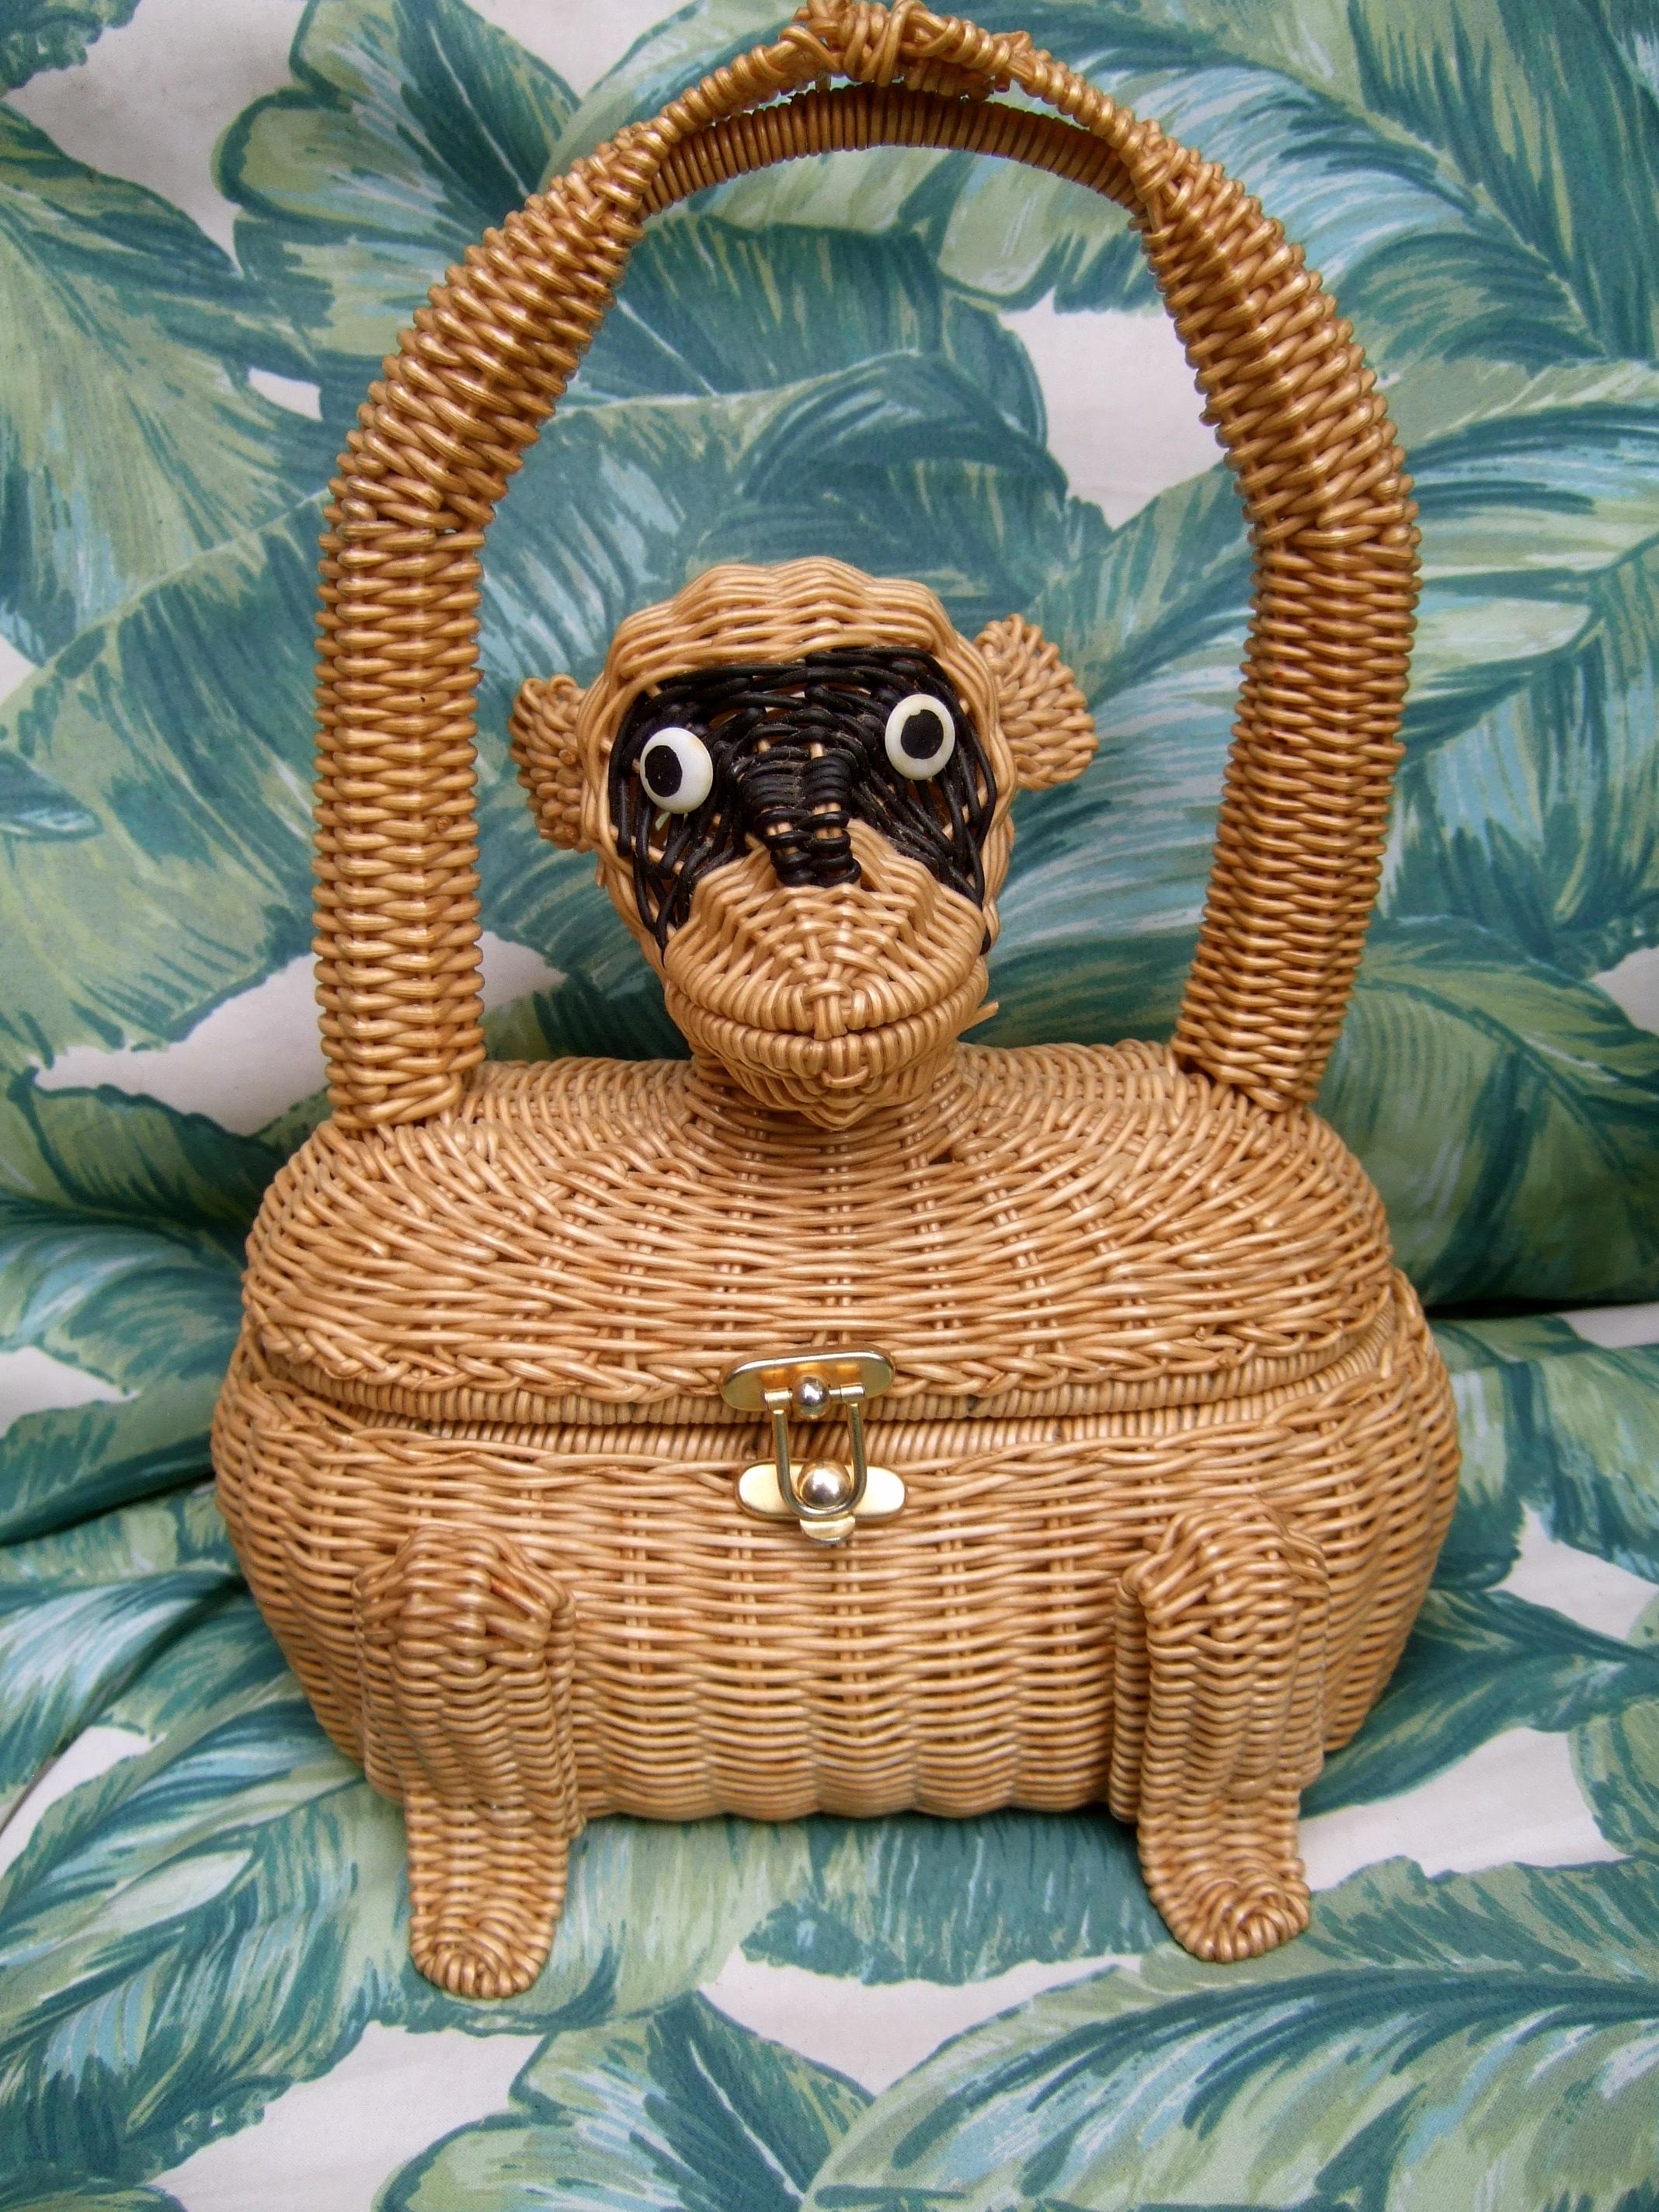 Whimsical Very Rare Wicker Monkey Handbag Designed by Marcus Brothers c 1960 For Sale 1